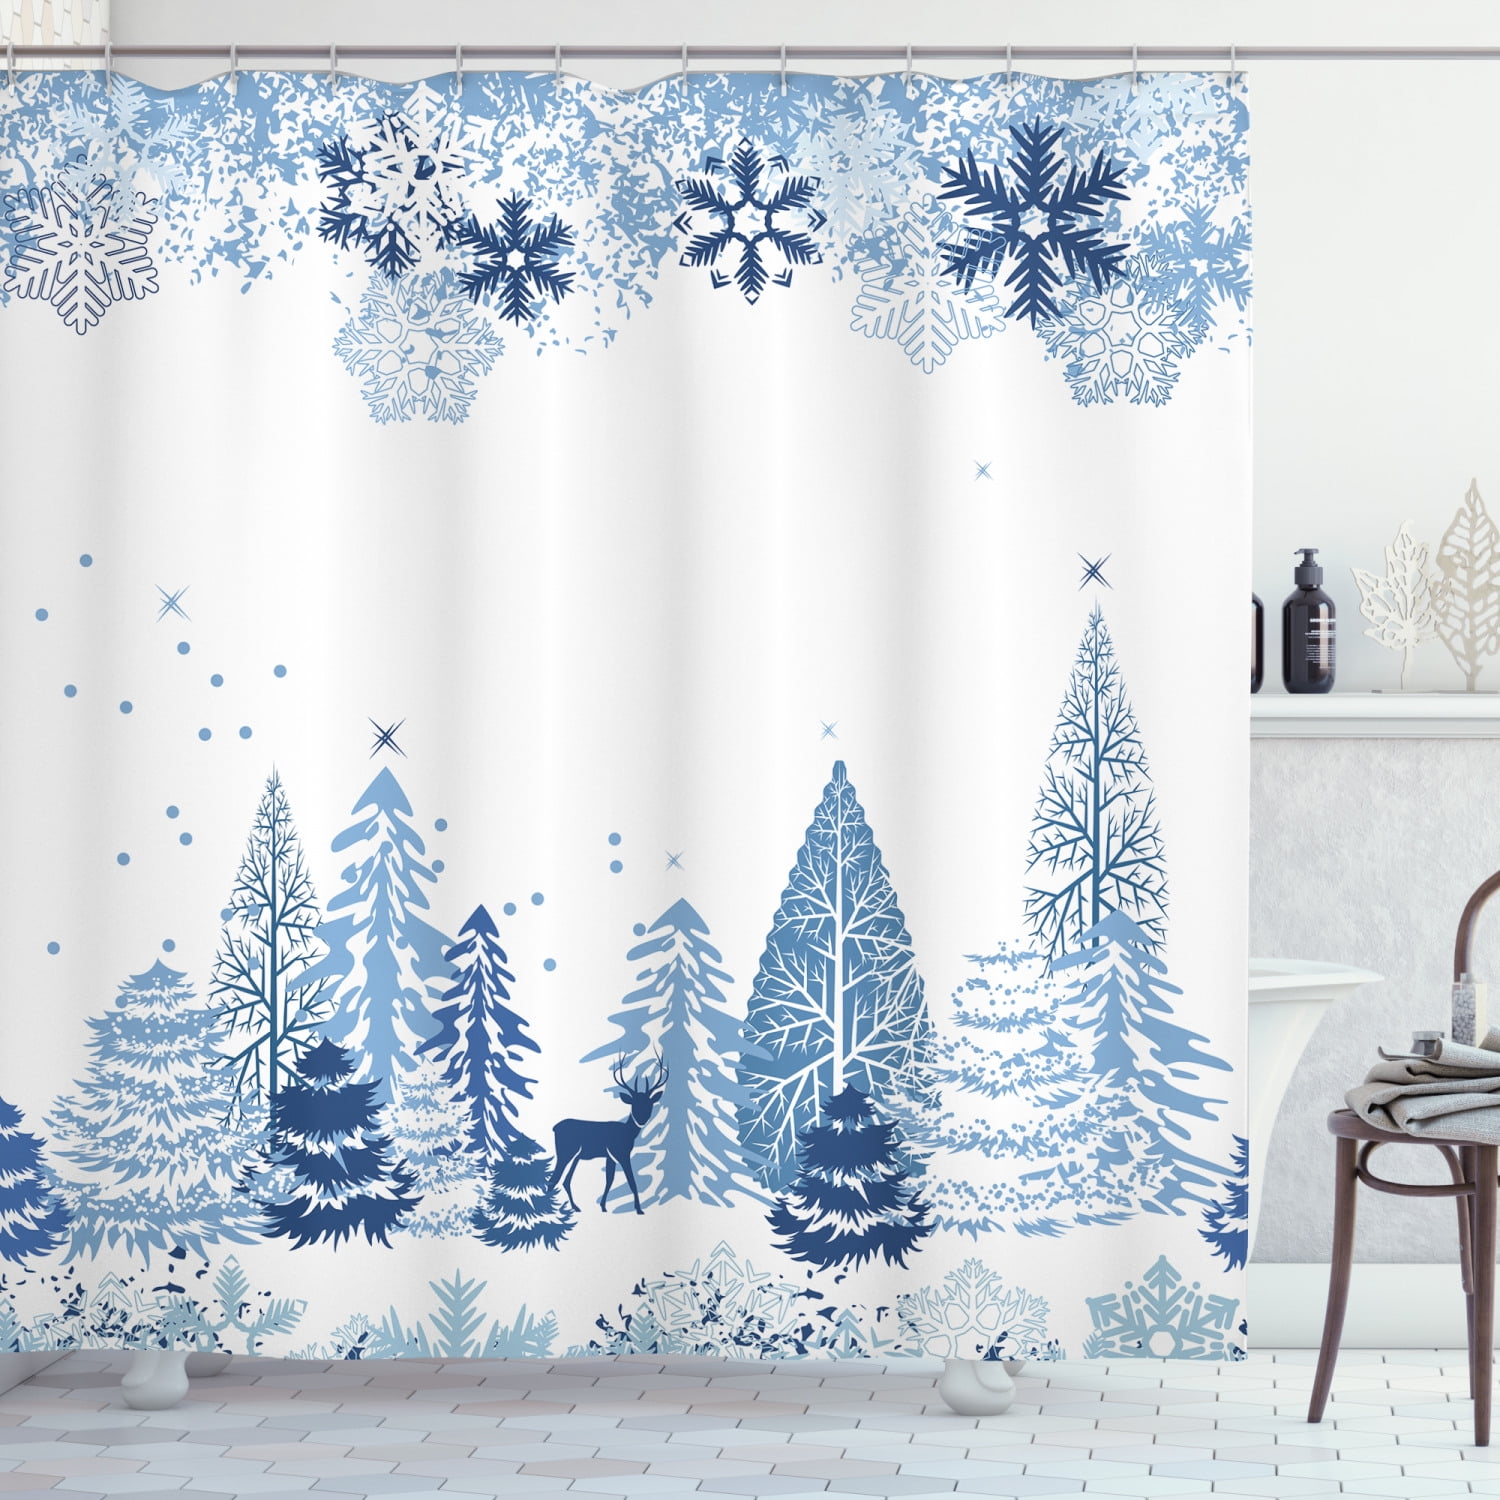 Frost Winter Snow Forest Trees Snowflakes Fabric Shower Curtain Bathroom Decor 